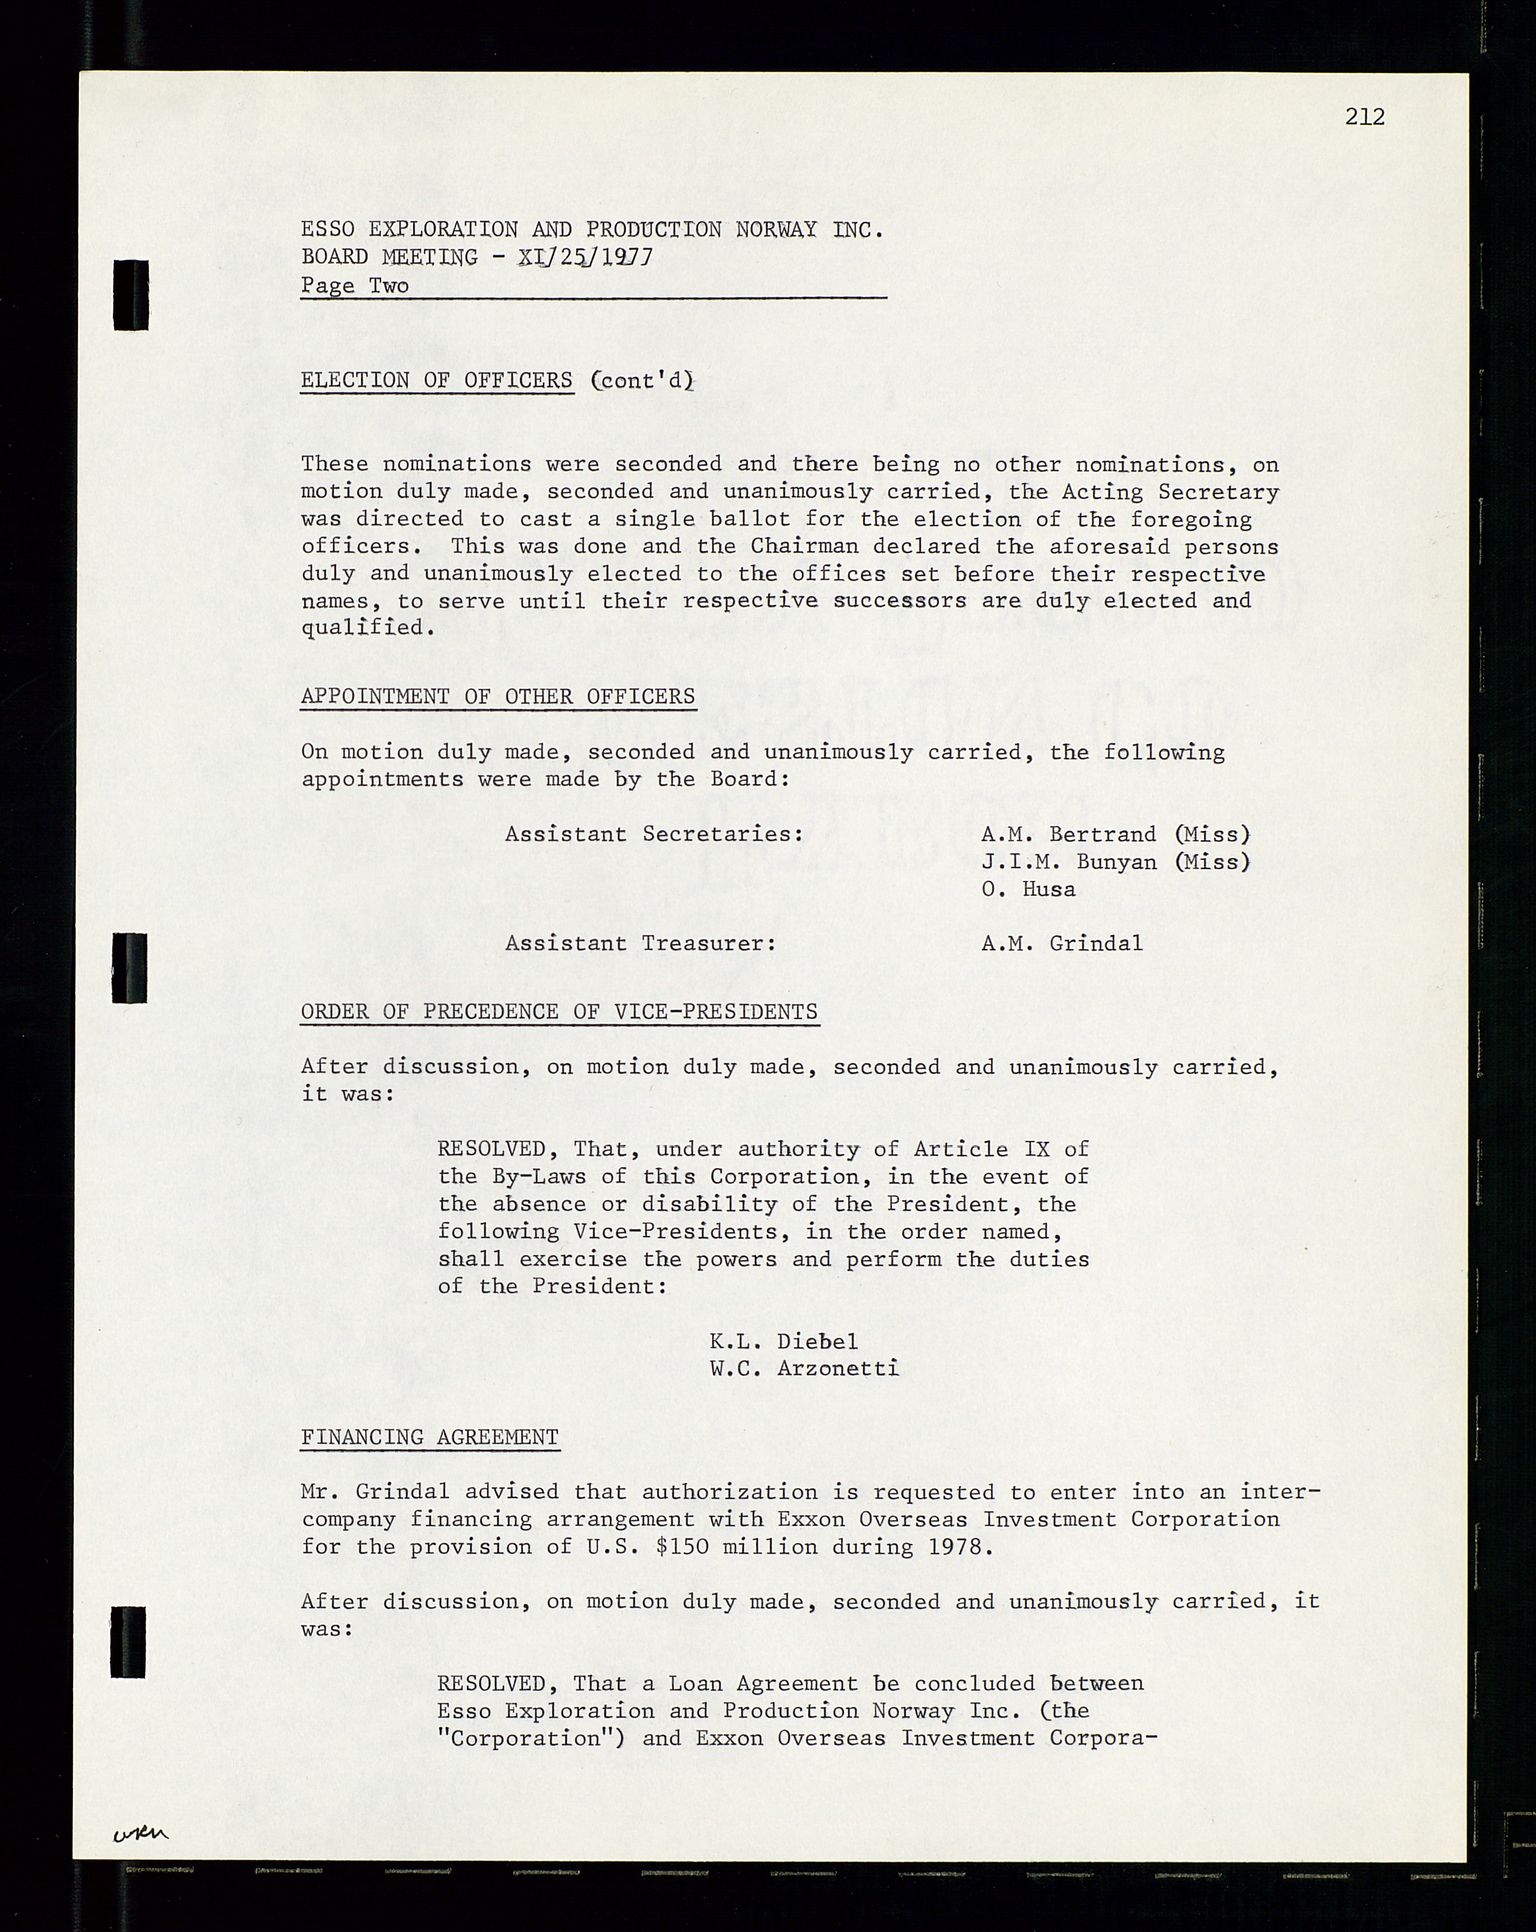 Pa 1512 - Esso Exploration and Production Norway Inc., SAST/A-101917/A/Aa/L0001/0002: Styredokumenter / Corporate records, Board meeting minutes, Agreements, Stocholder meetings, 1975-1979, s. 74